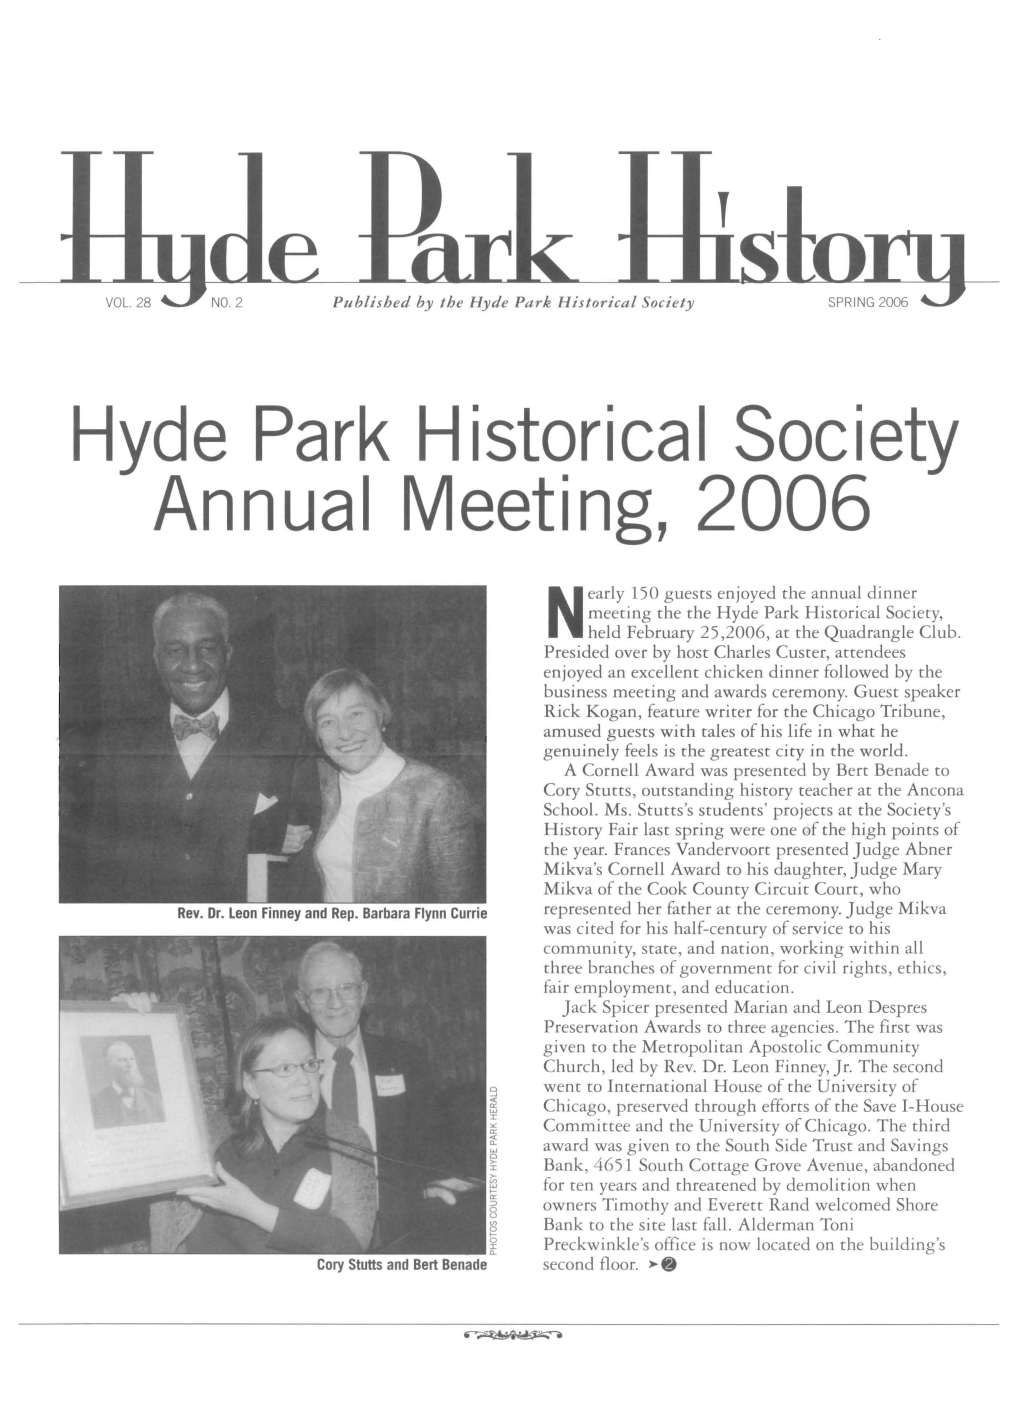 Hyde Park Historical Society Annual Meeting, 2006